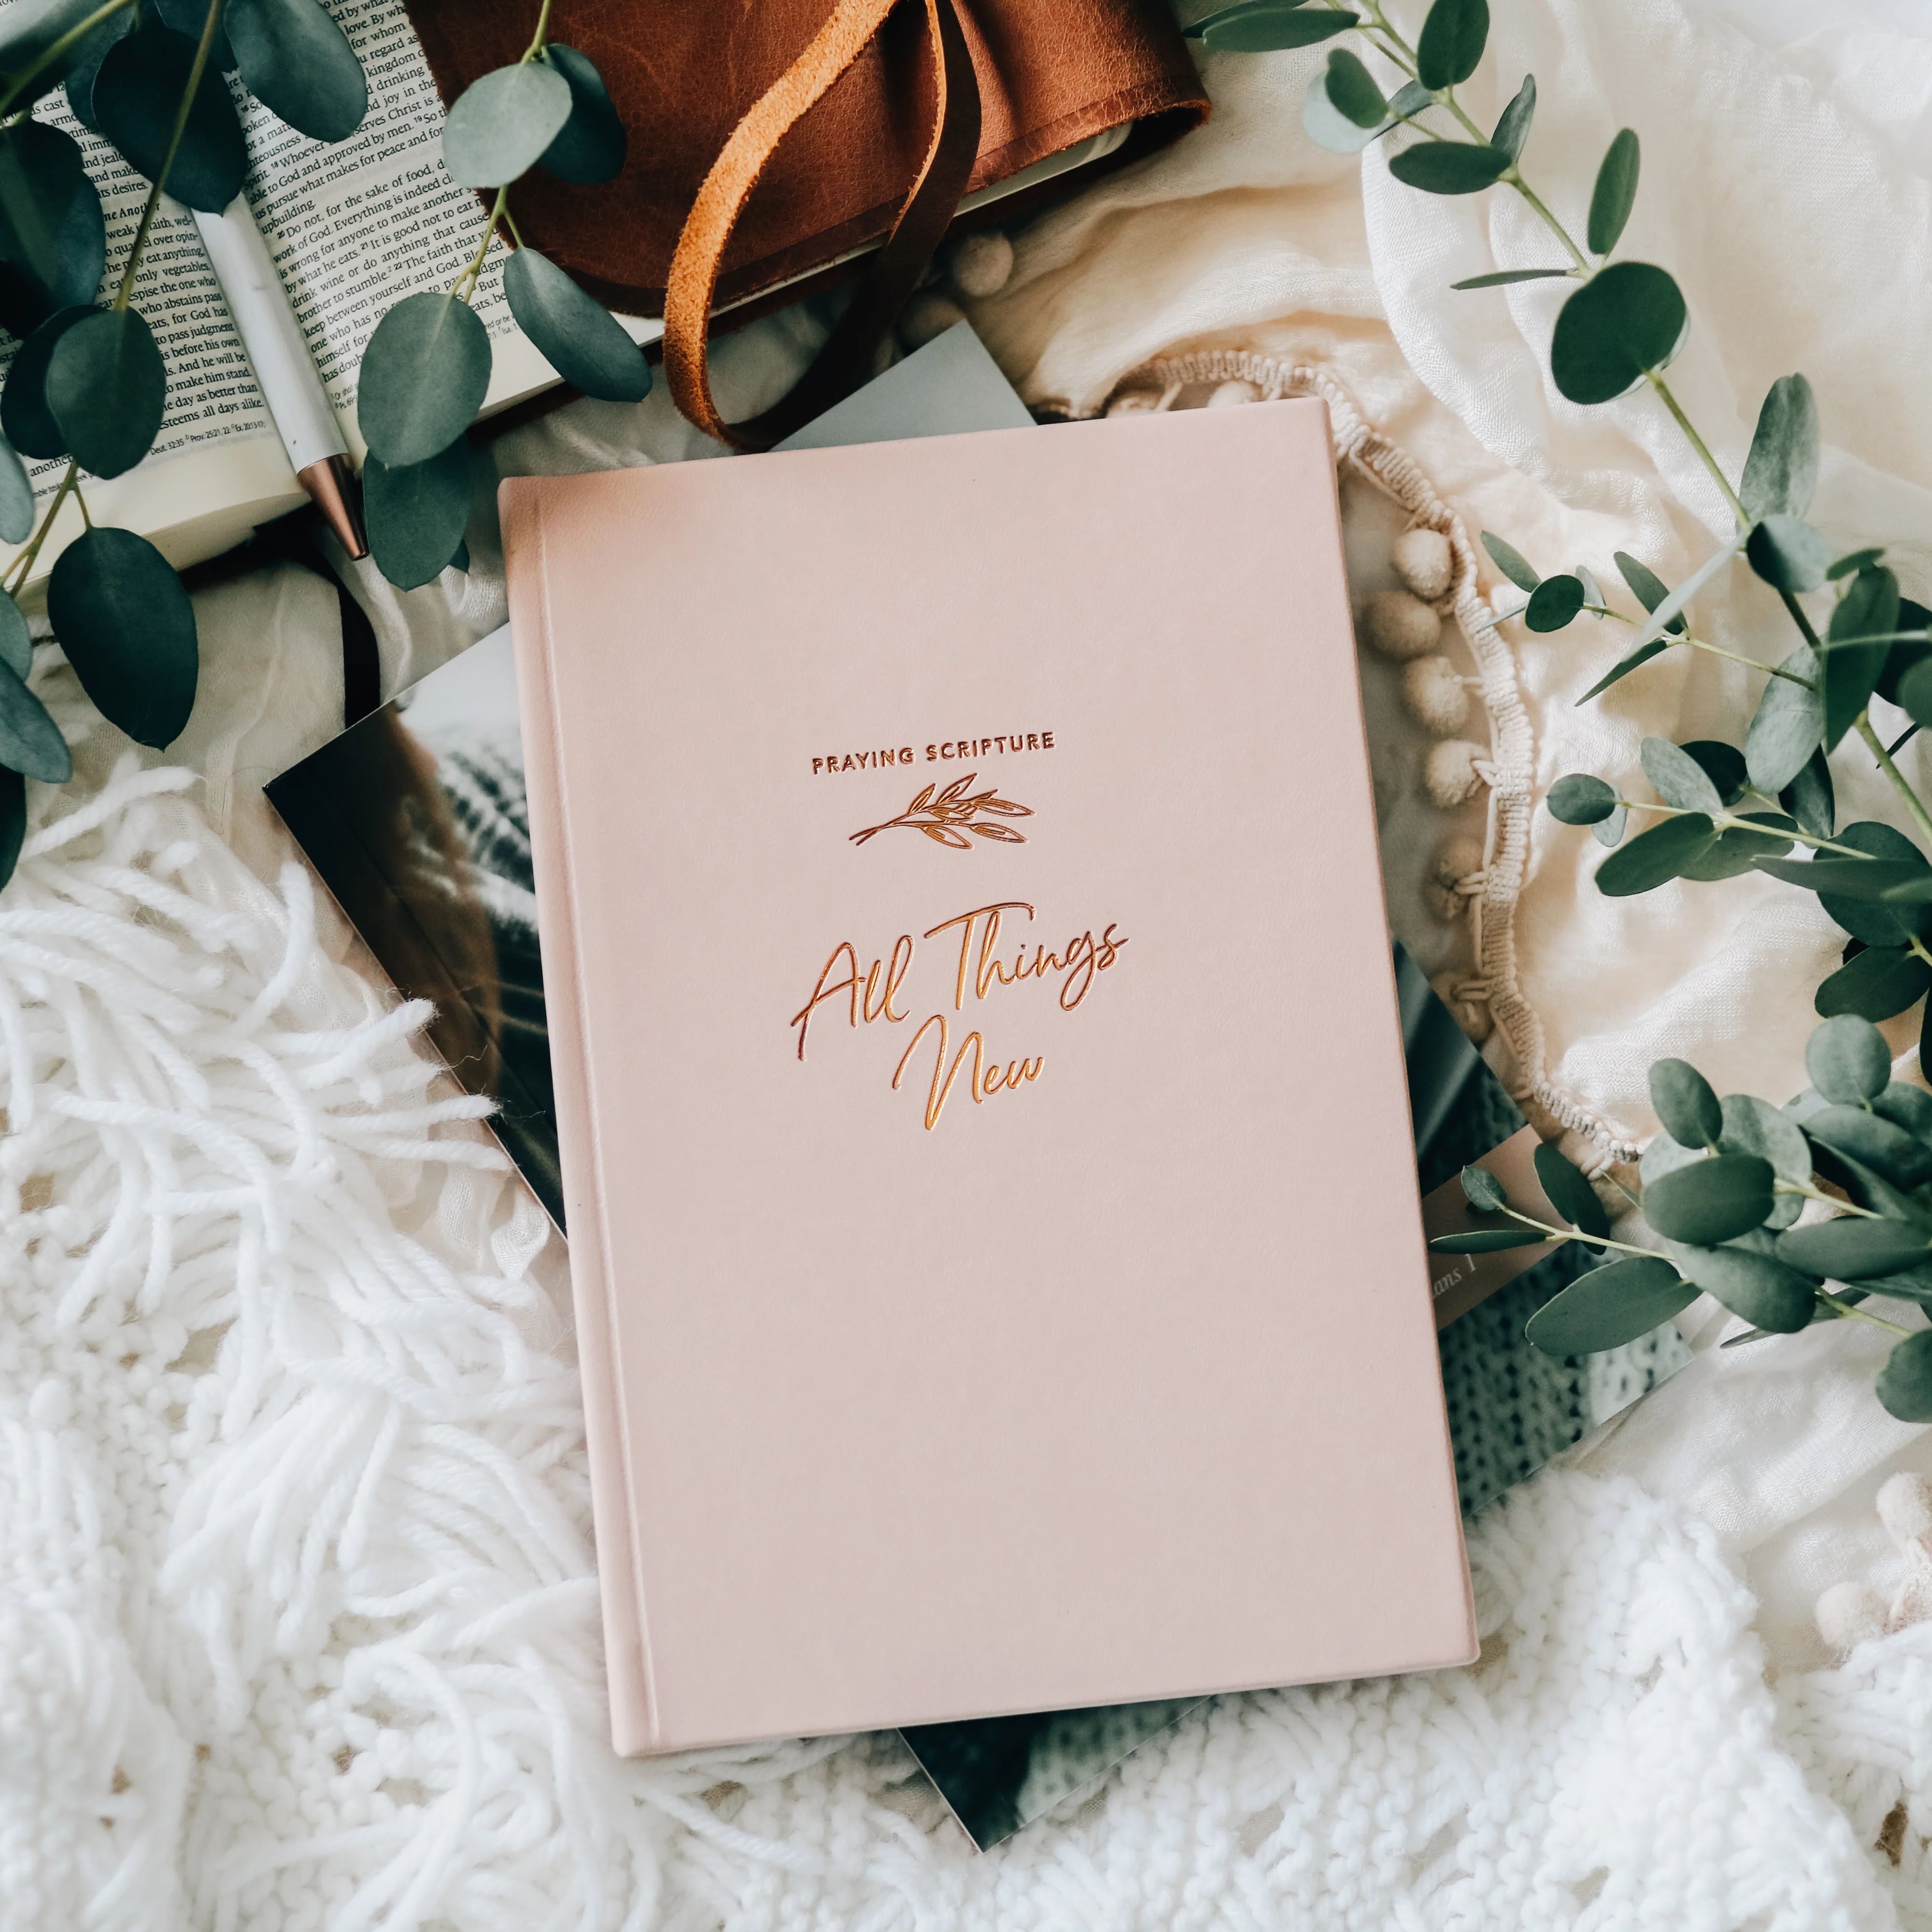 All Things New | Praying Scripture Journal | The Daily Grace Co.